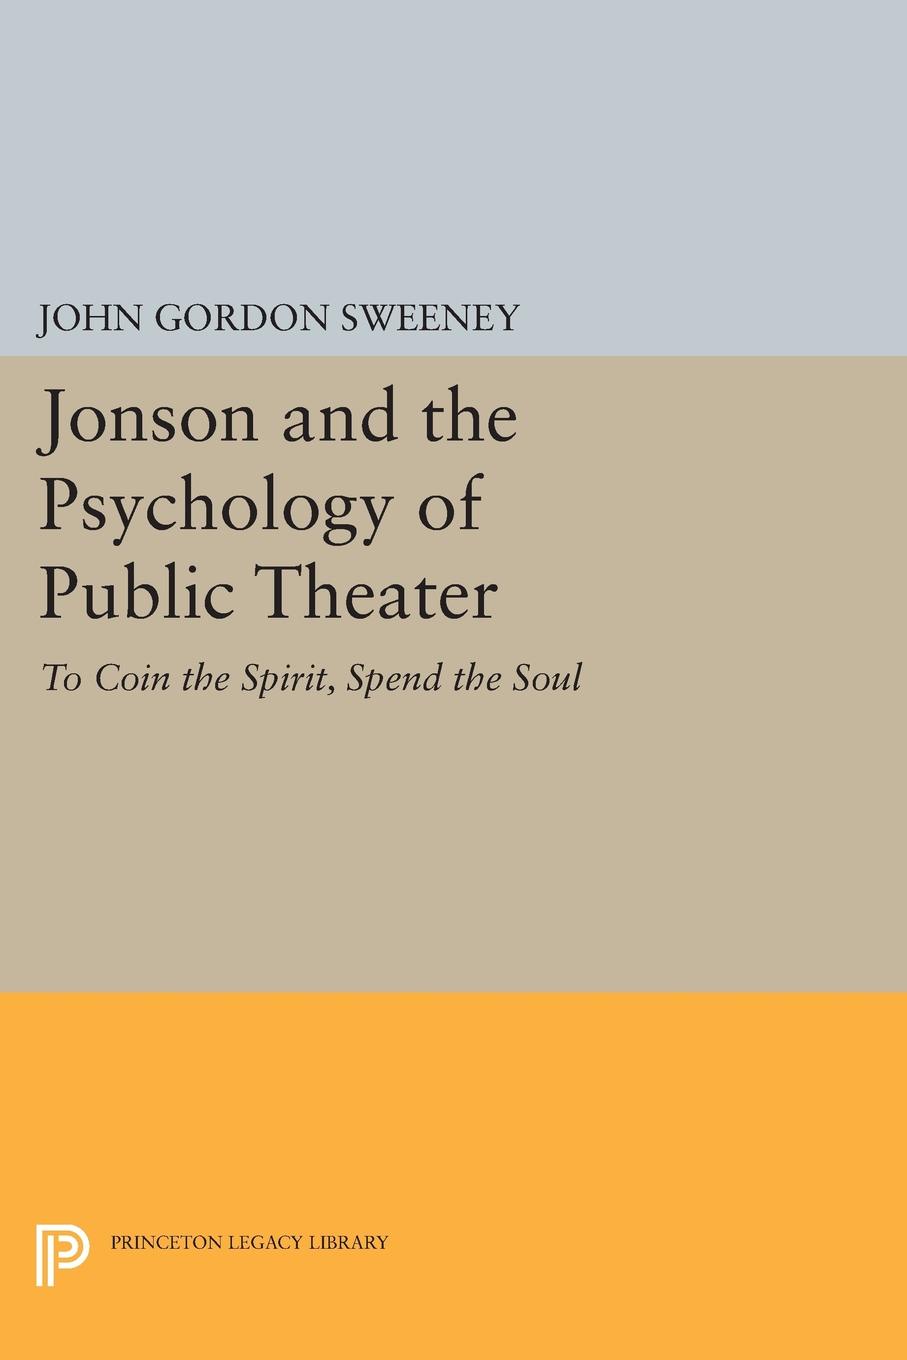 Jonson and the Psychology of Public Theater. To Coin the Spirit, Spend the Soul